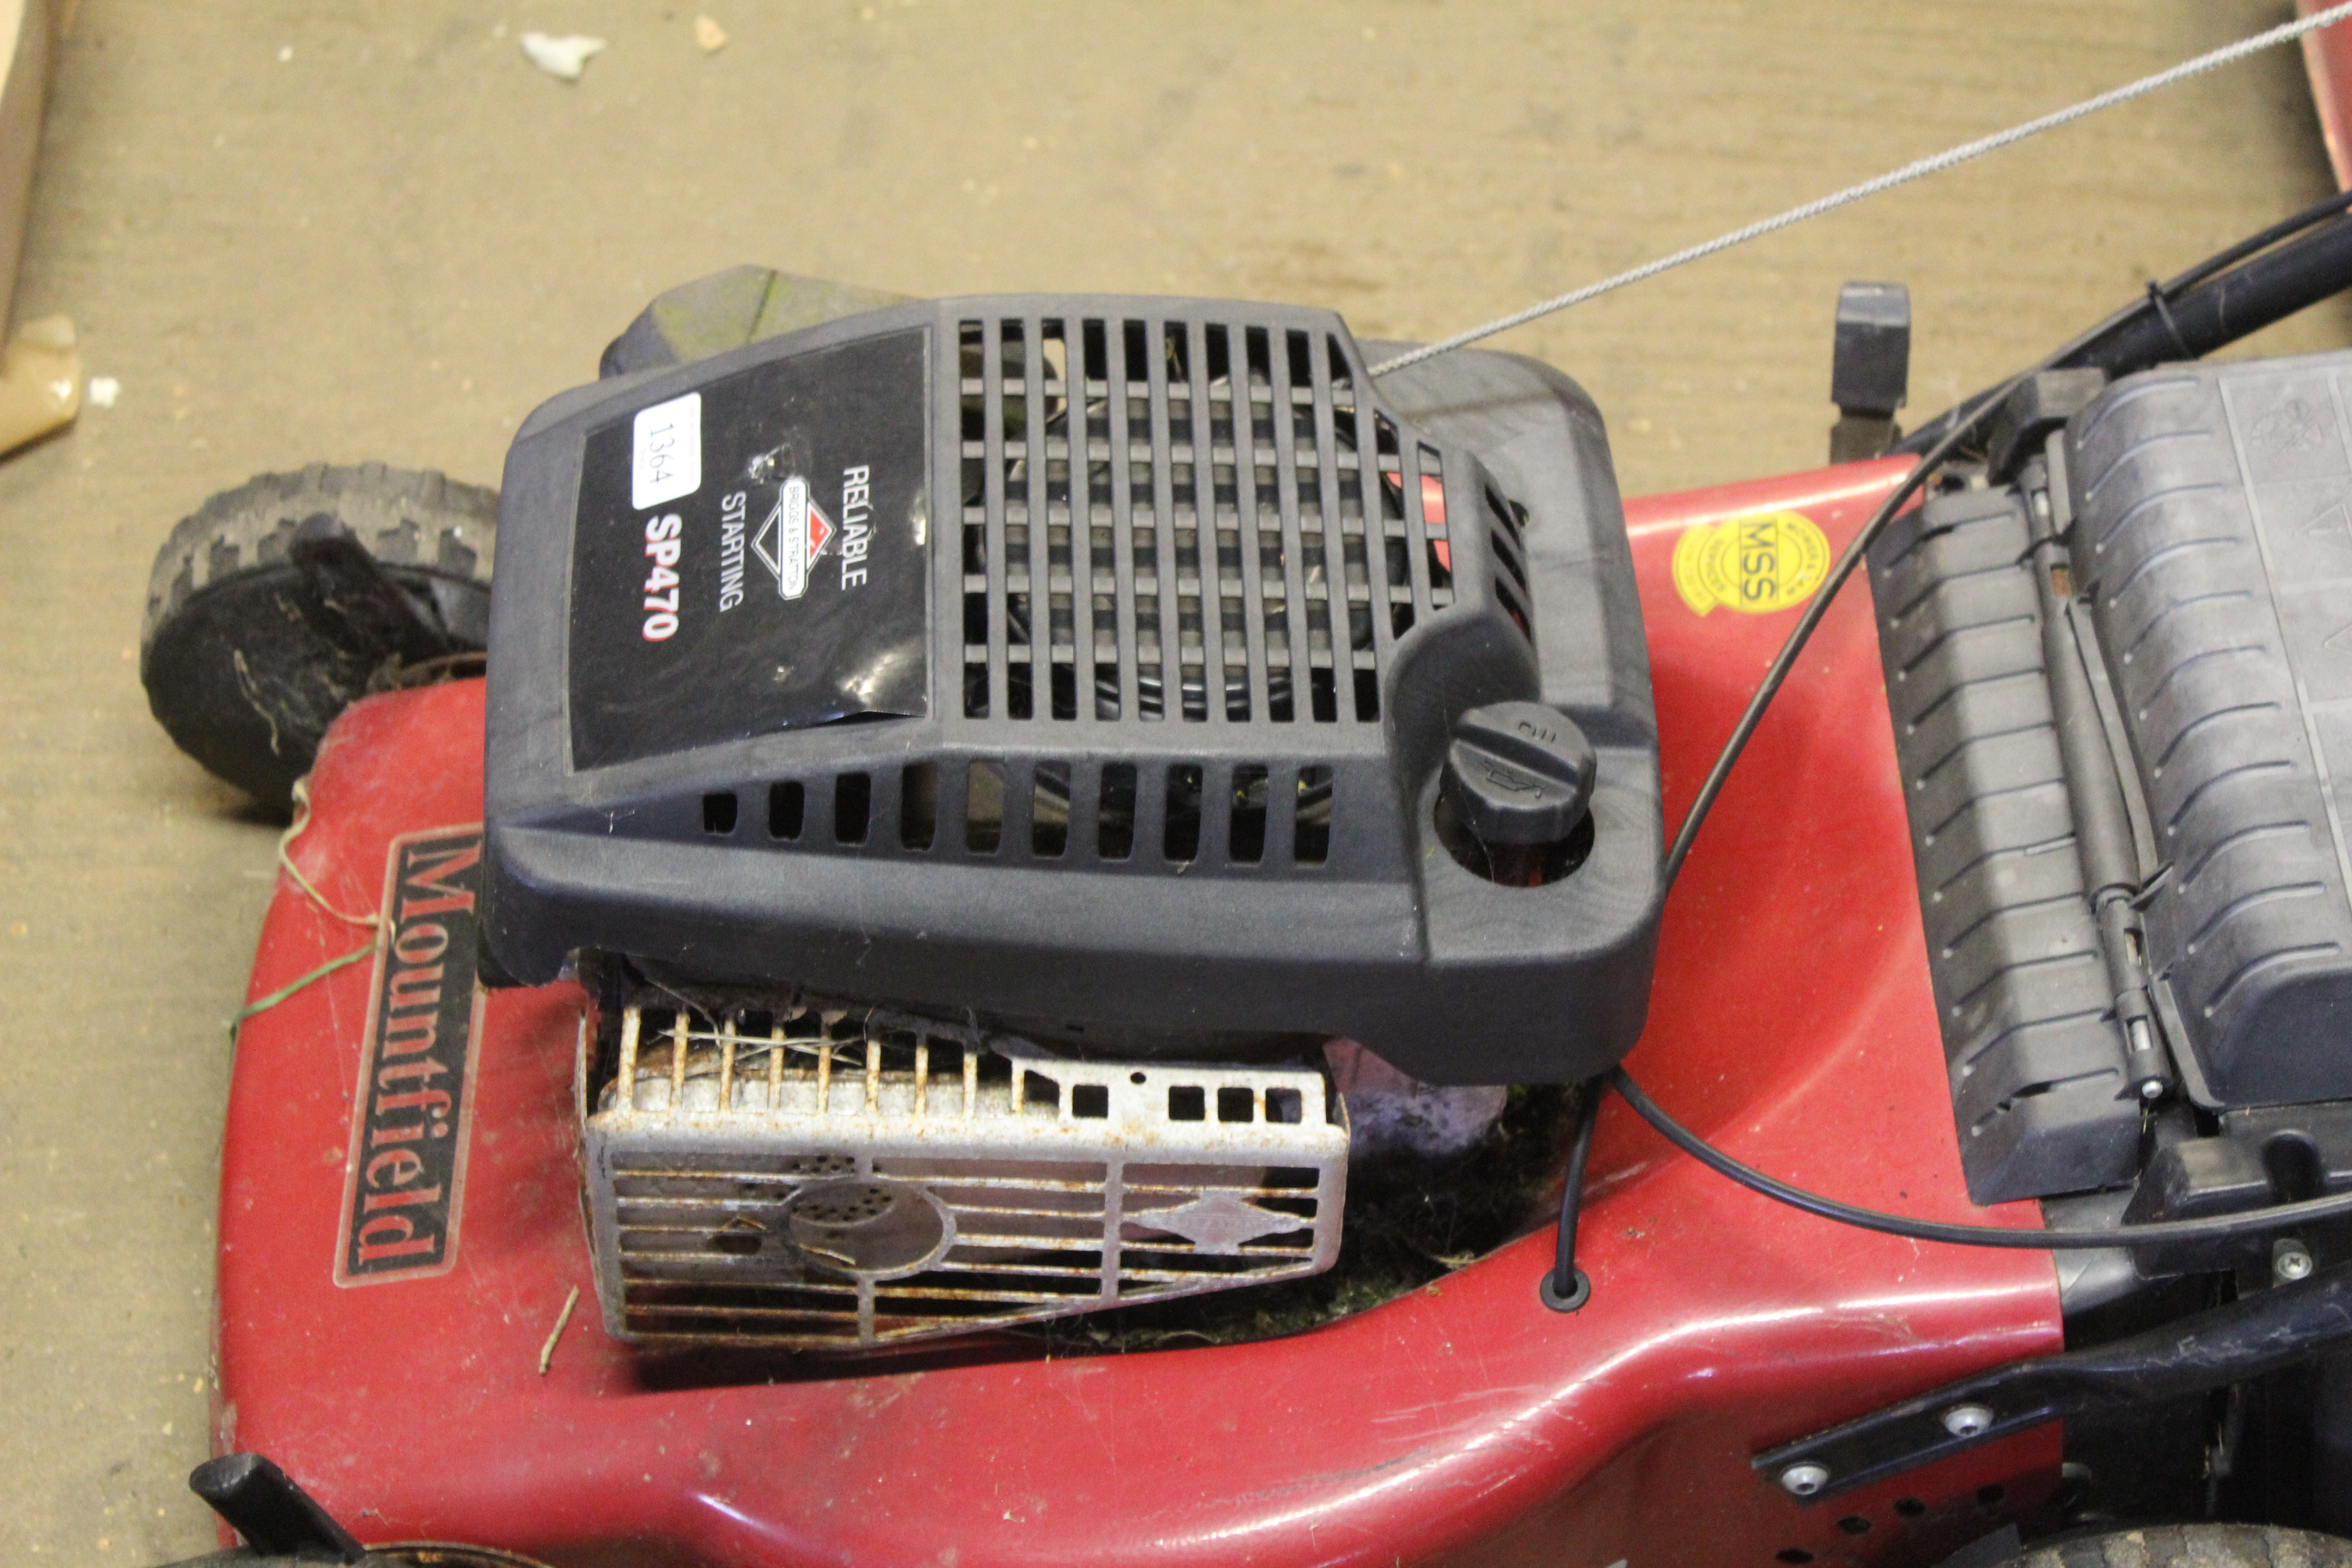 A Mountfield rotary garden lawnmower with Briggs & - Image 4 of 4